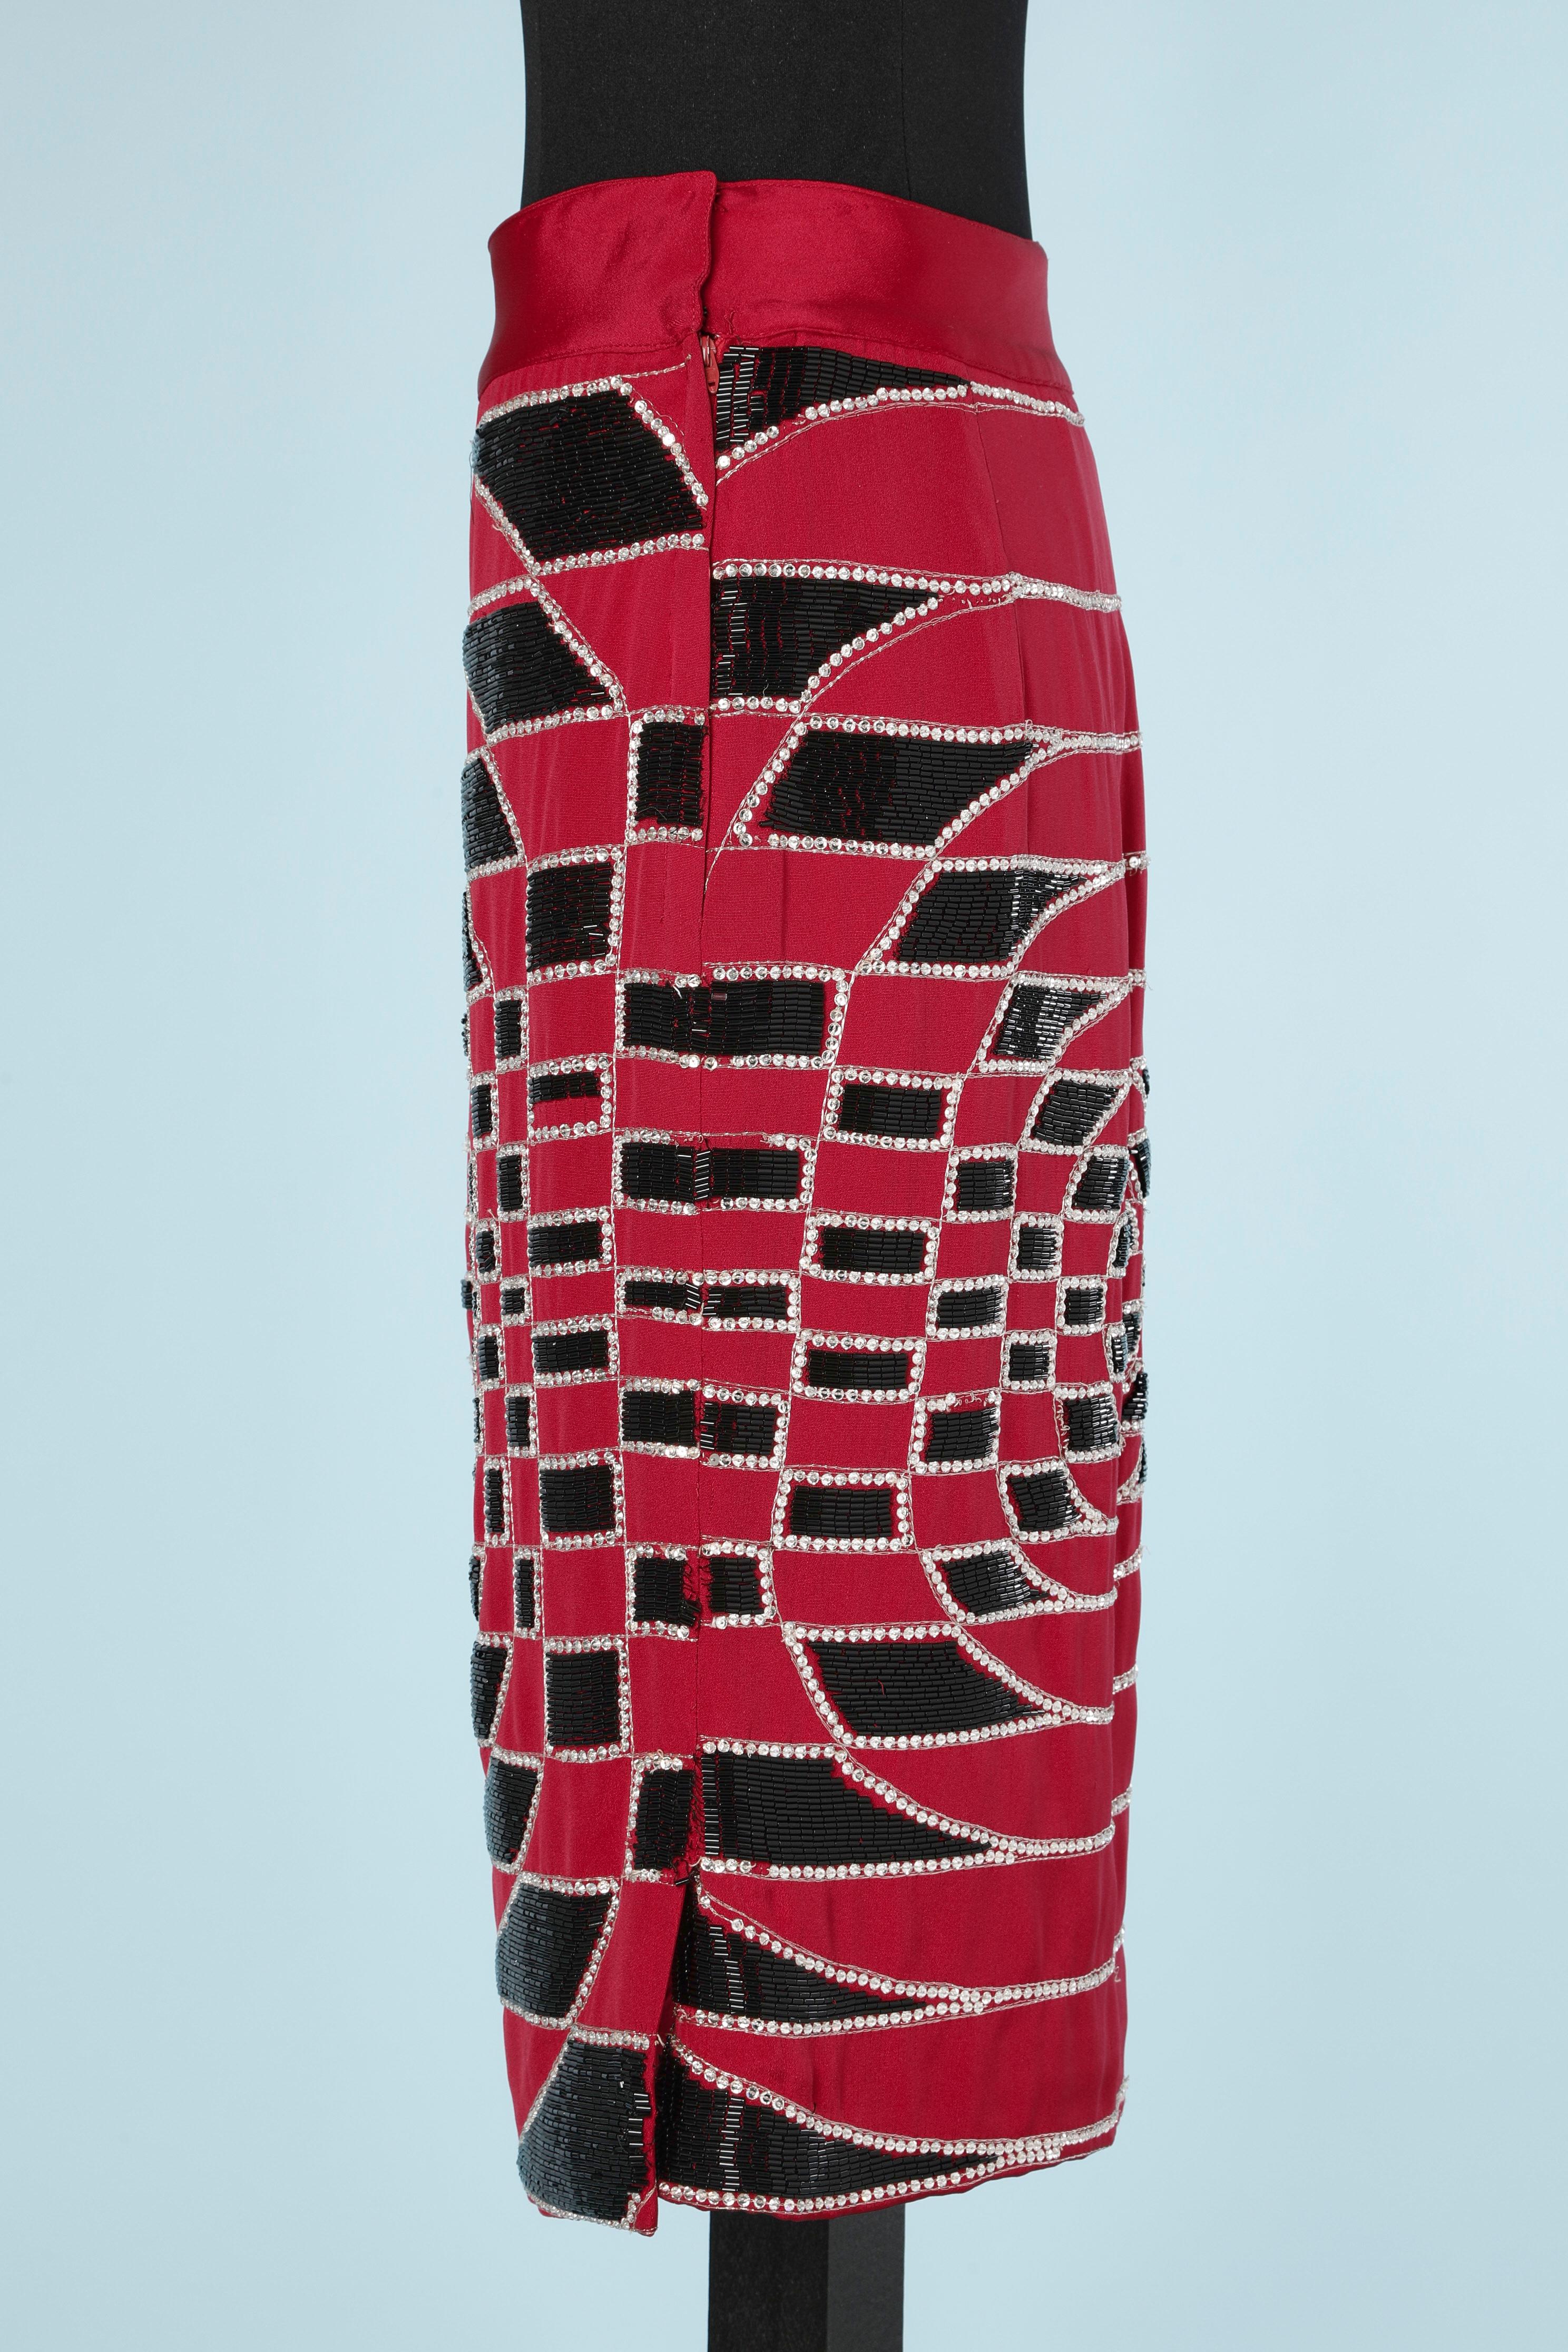 Black, red and silver  beaded skirt Gianni Versace Sera  In Excellent Condition For Sale In Saint-Ouen-Sur-Seine, FR